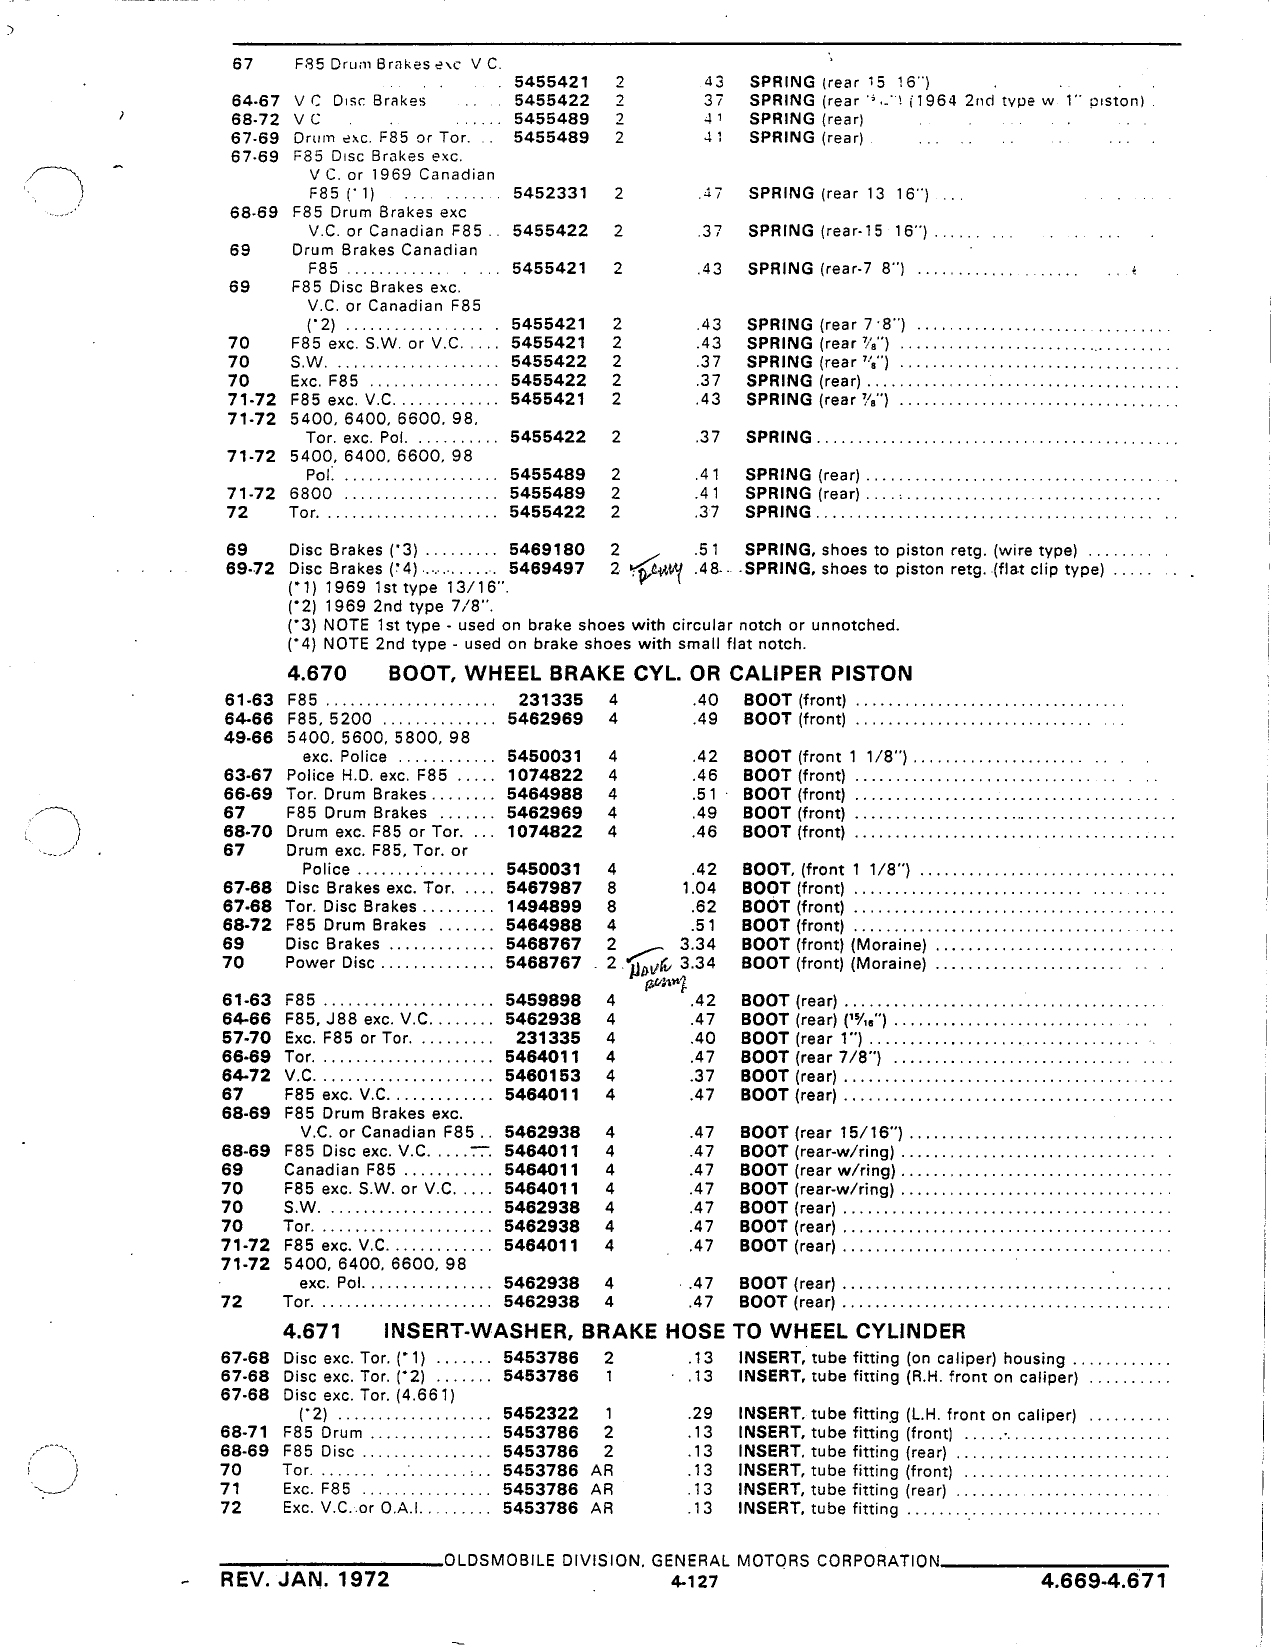 Parts and Accessories Catalog January 1972